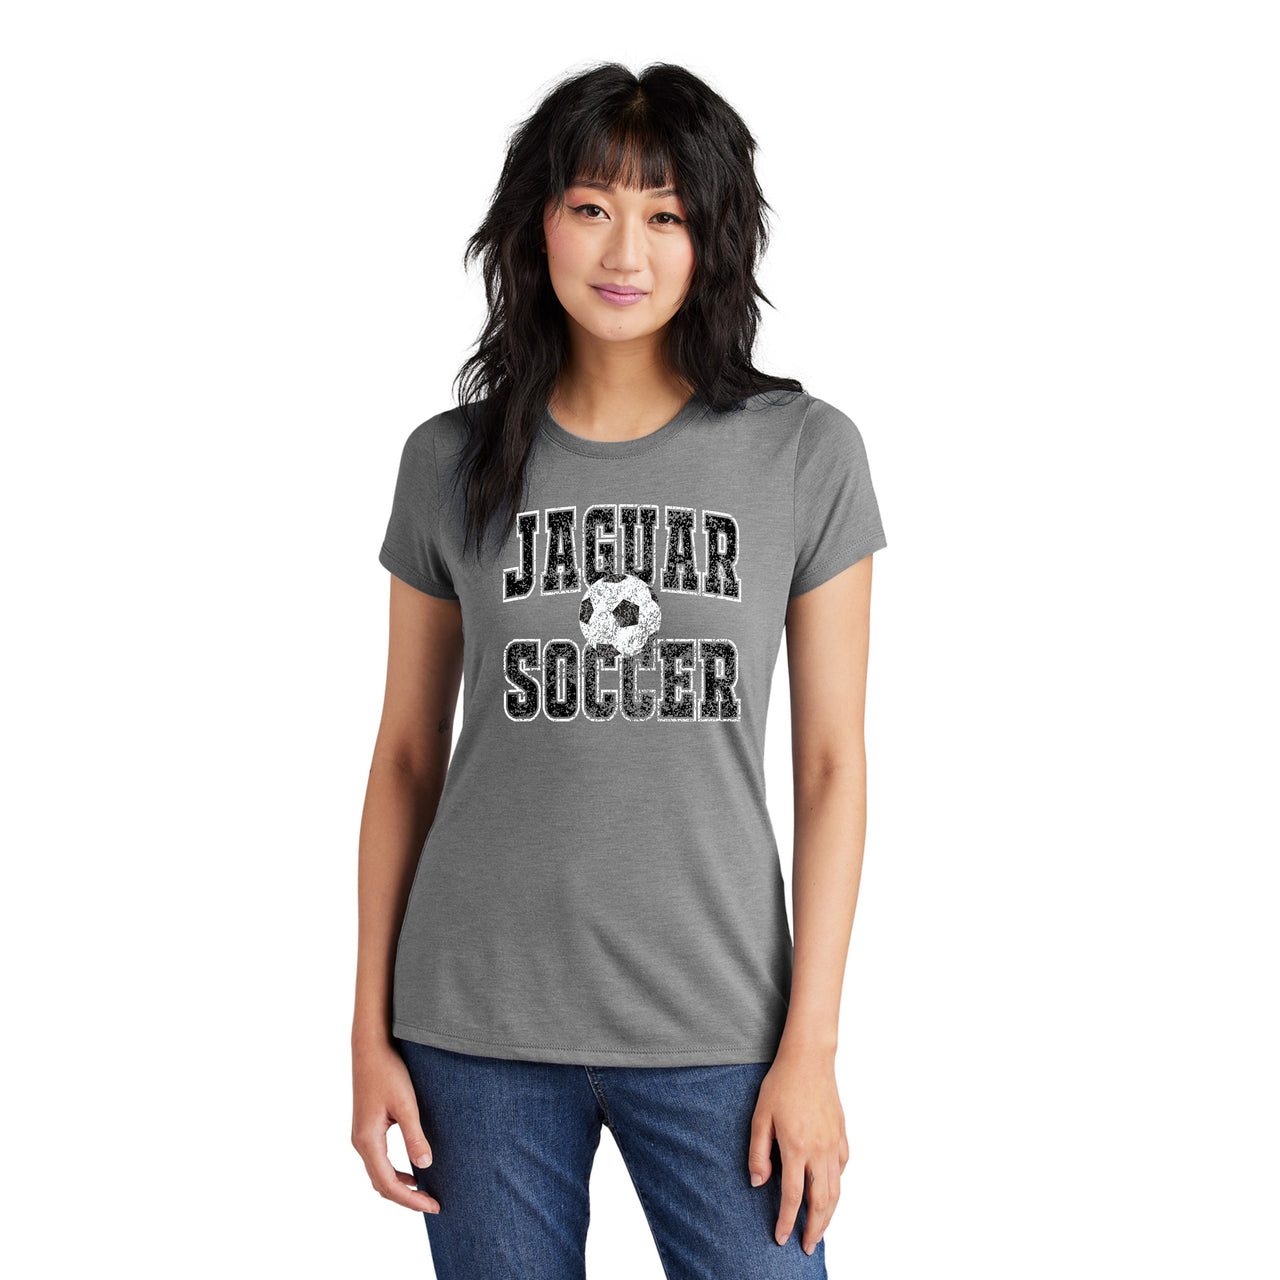 Adult - 6 Apparel Options to pick from (Centennial Jaguars Soccer)